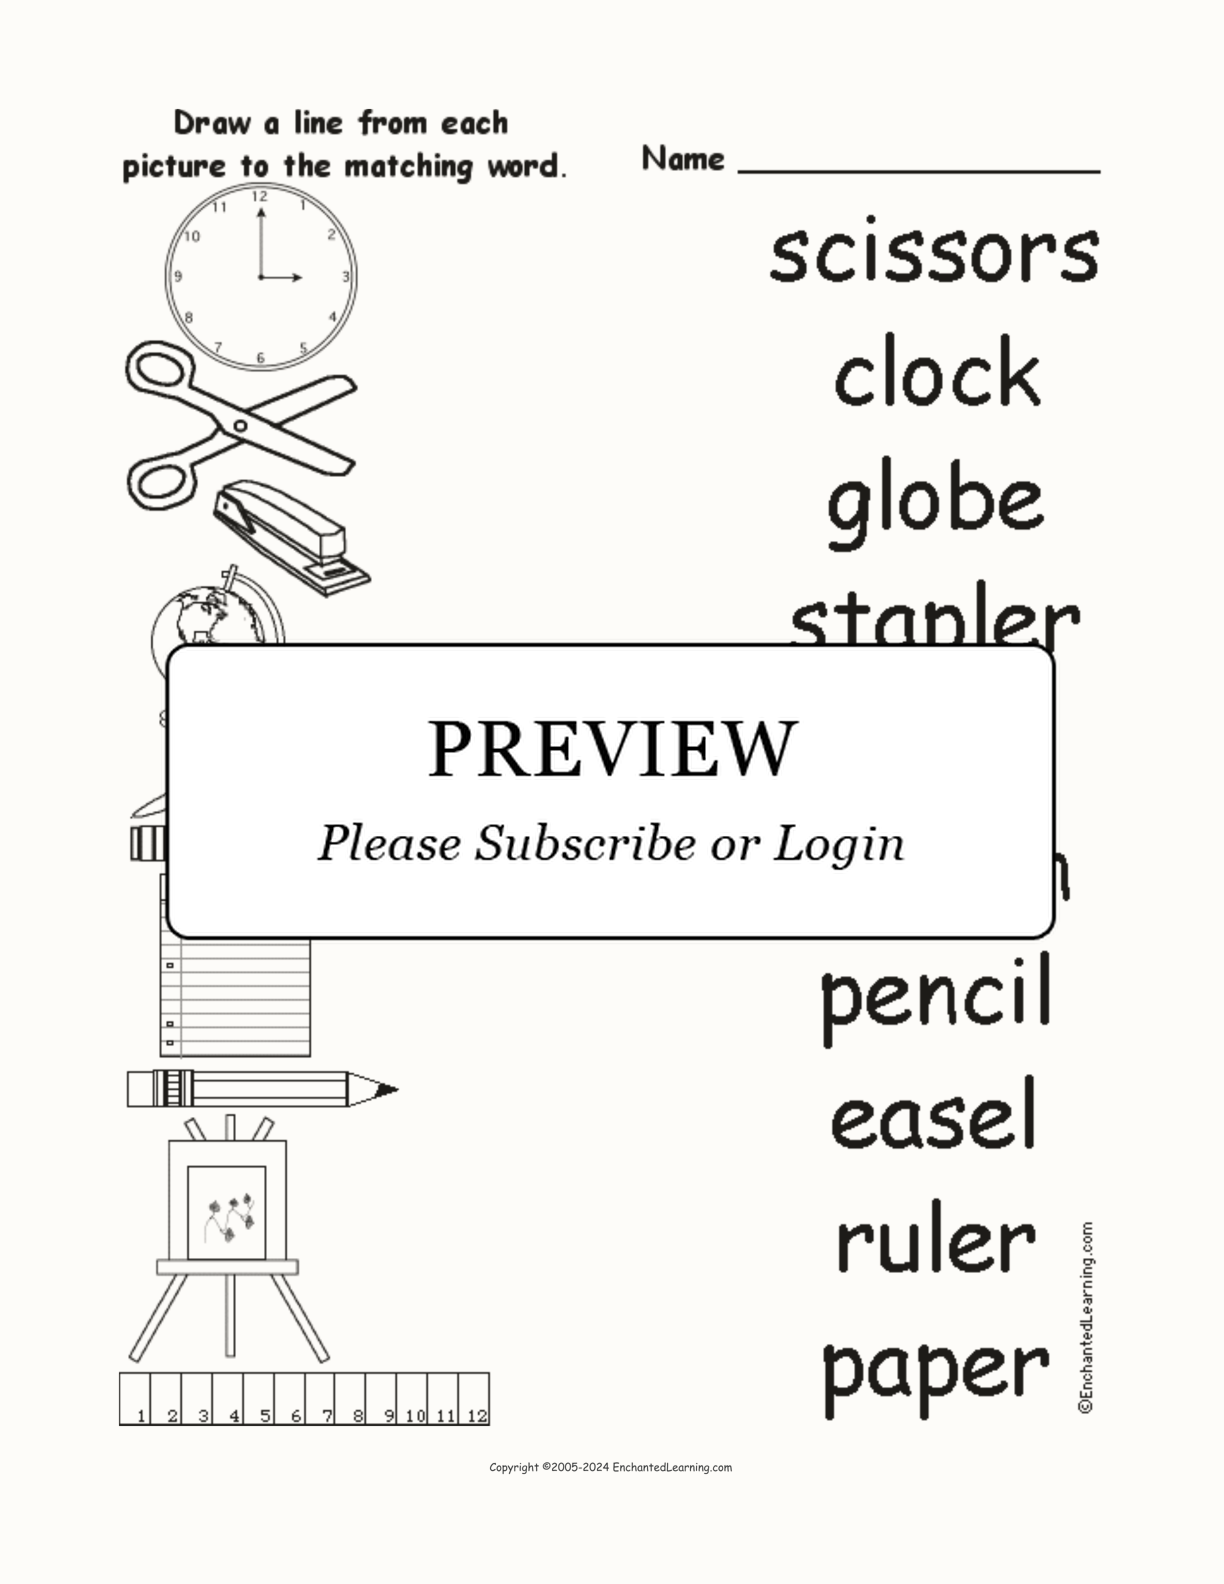 Match the Words to the School Pictures interactive worksheet page 1